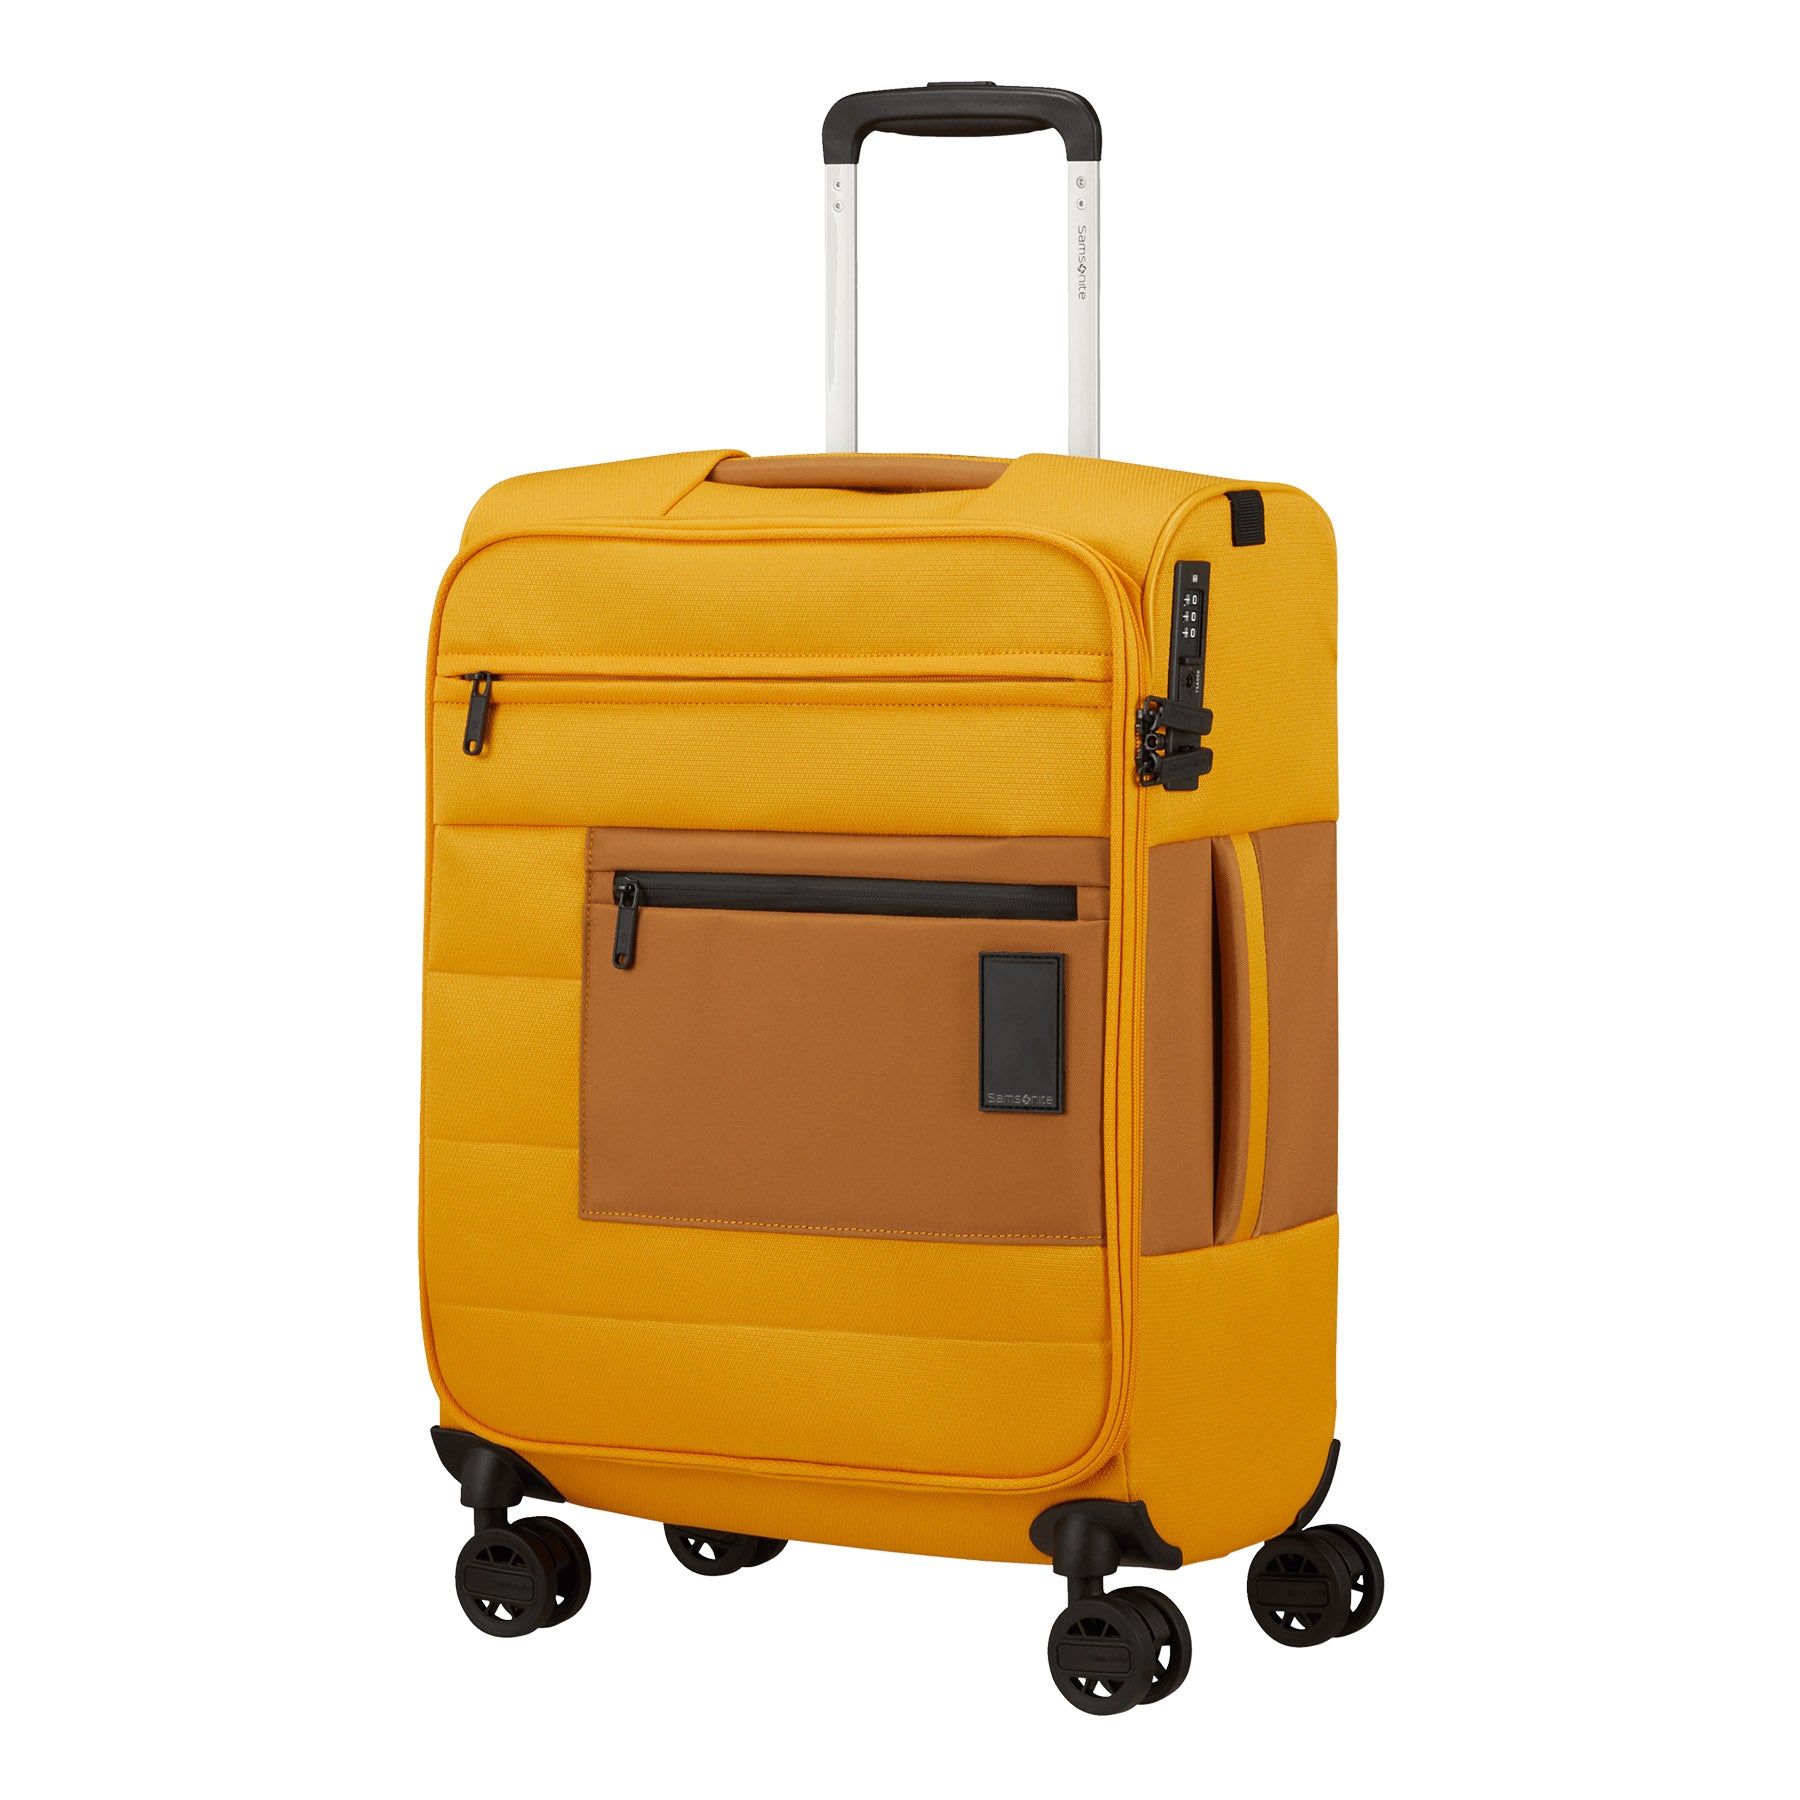 Samsonite Vacay Spinner Carry-On Luggage - Golden Yellow